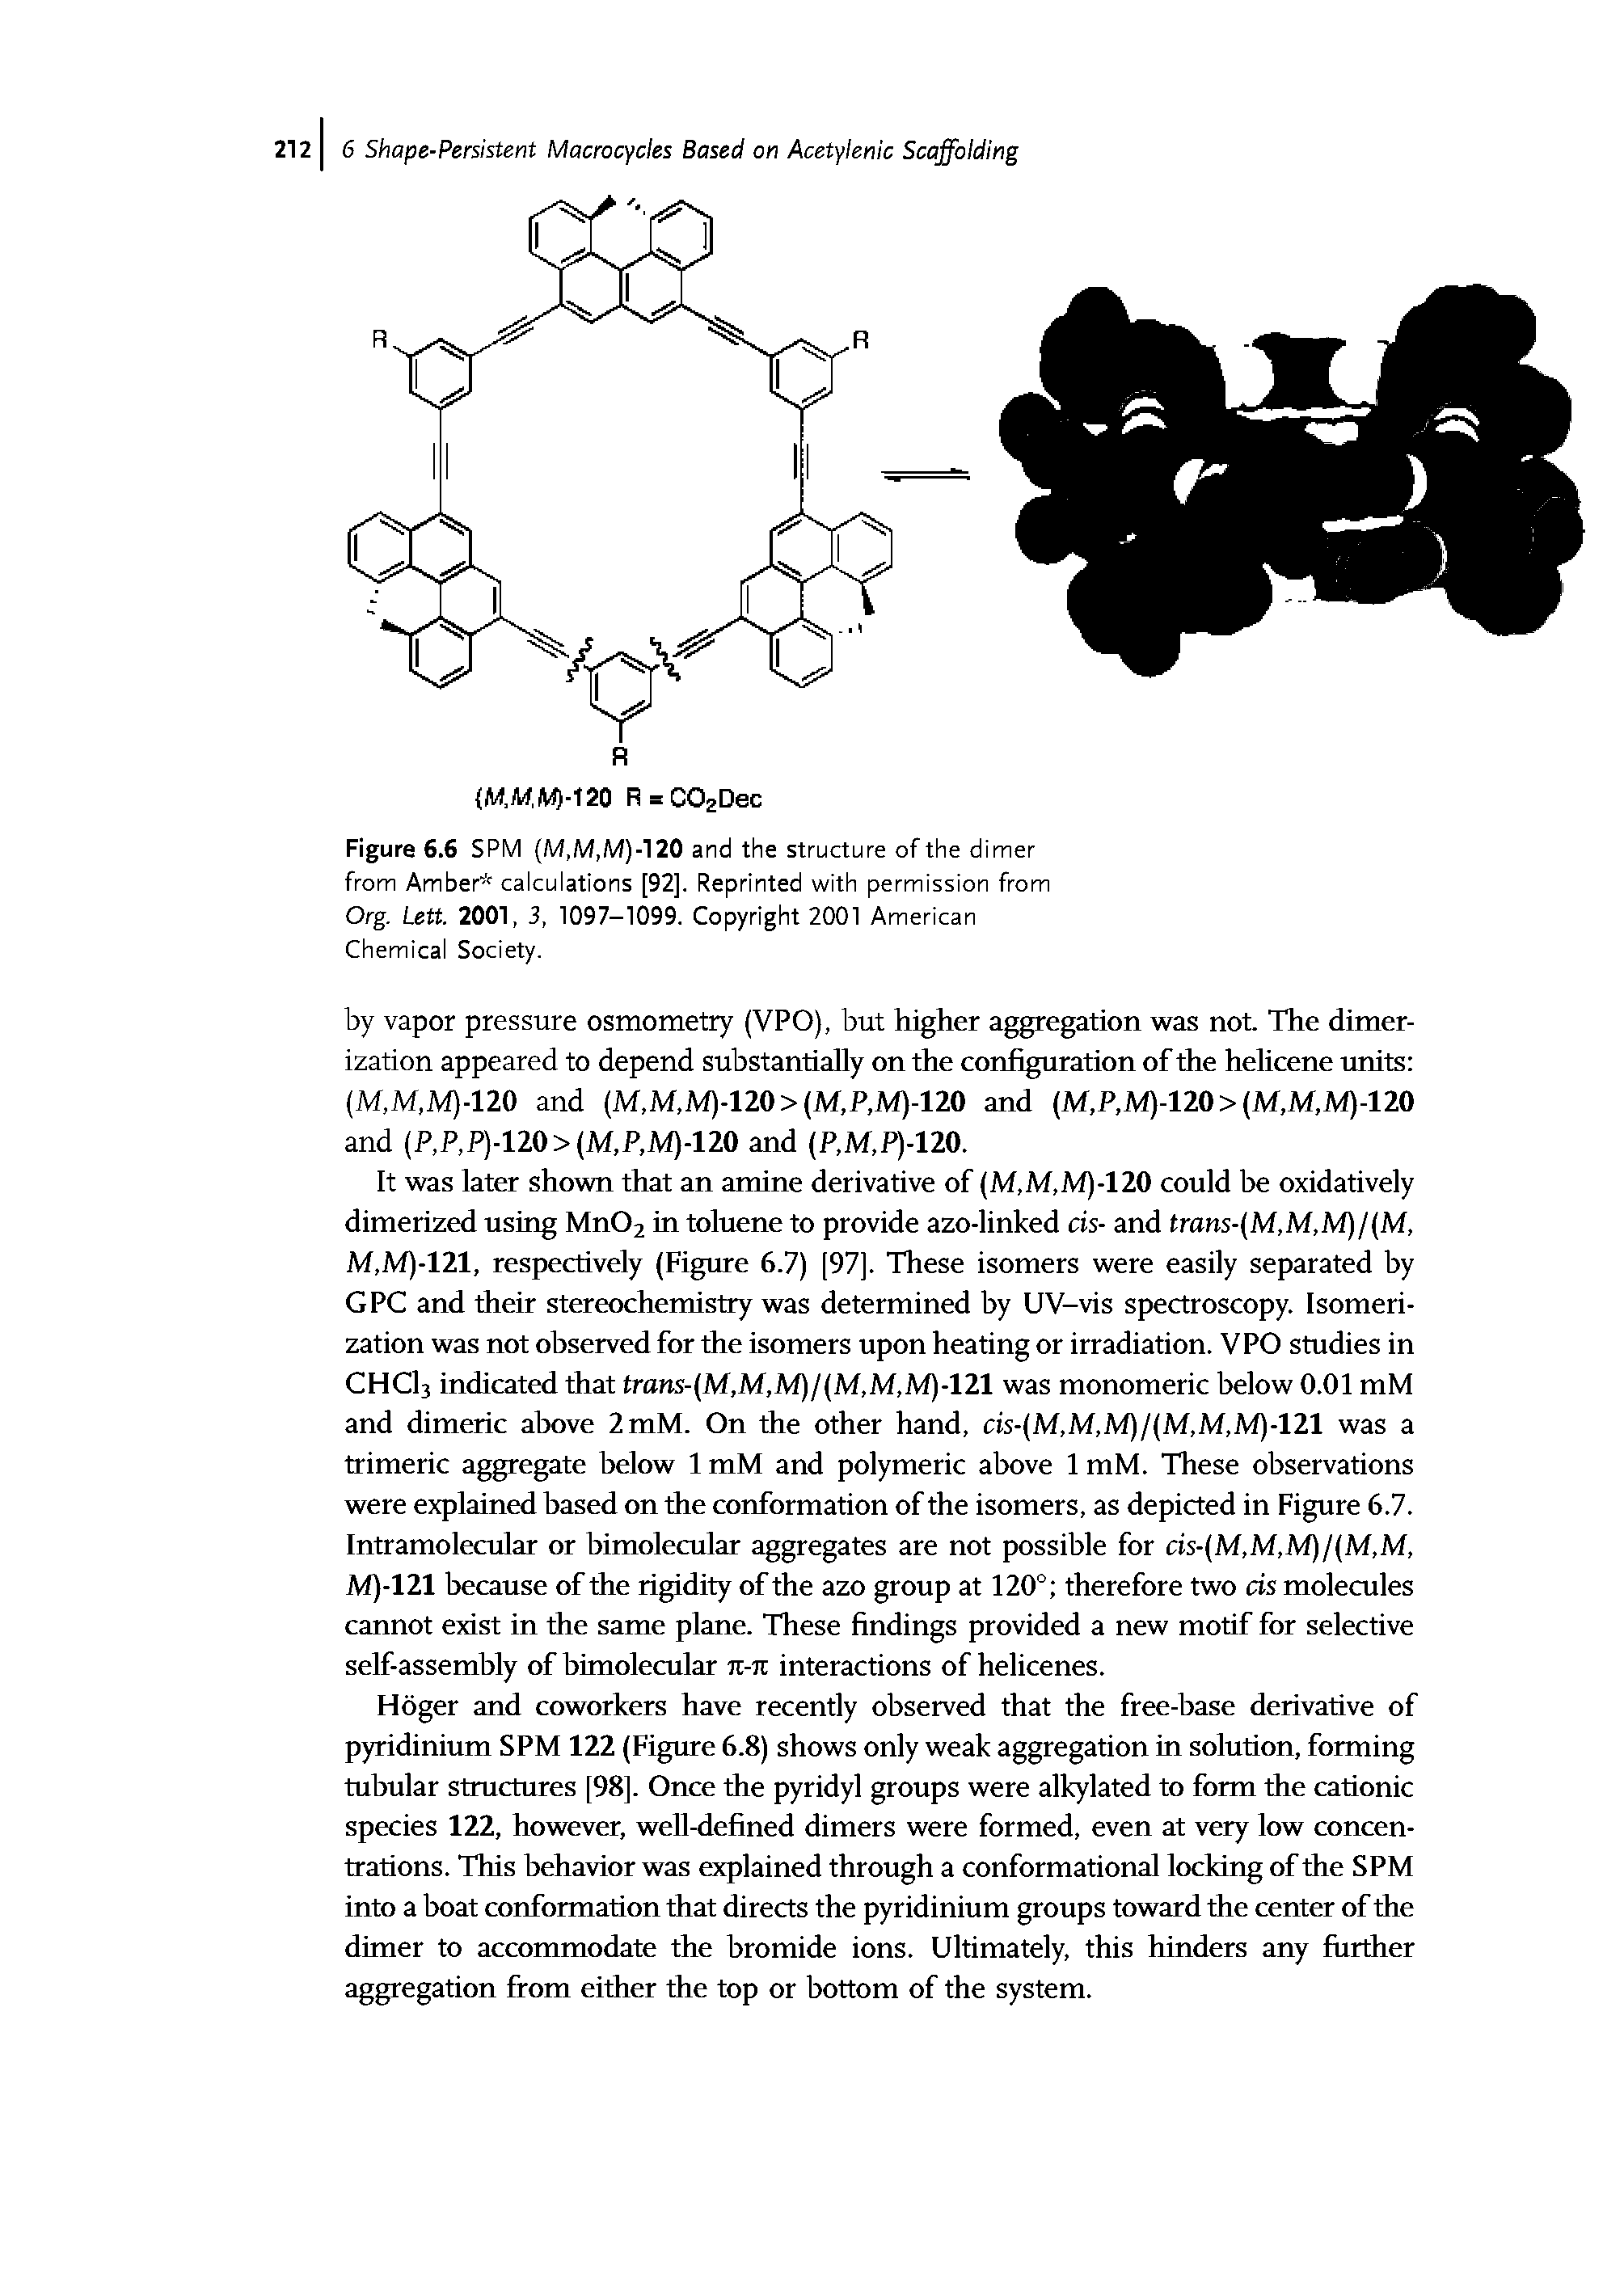 Figure 6.6 SPM (M,M,M)-120 and the structure of the dimer from Amber calculations [92]. Reprinted with permission from Org. Lett. 2001, 3, 1097-1099. Copyright 2001 American Chemical Society.